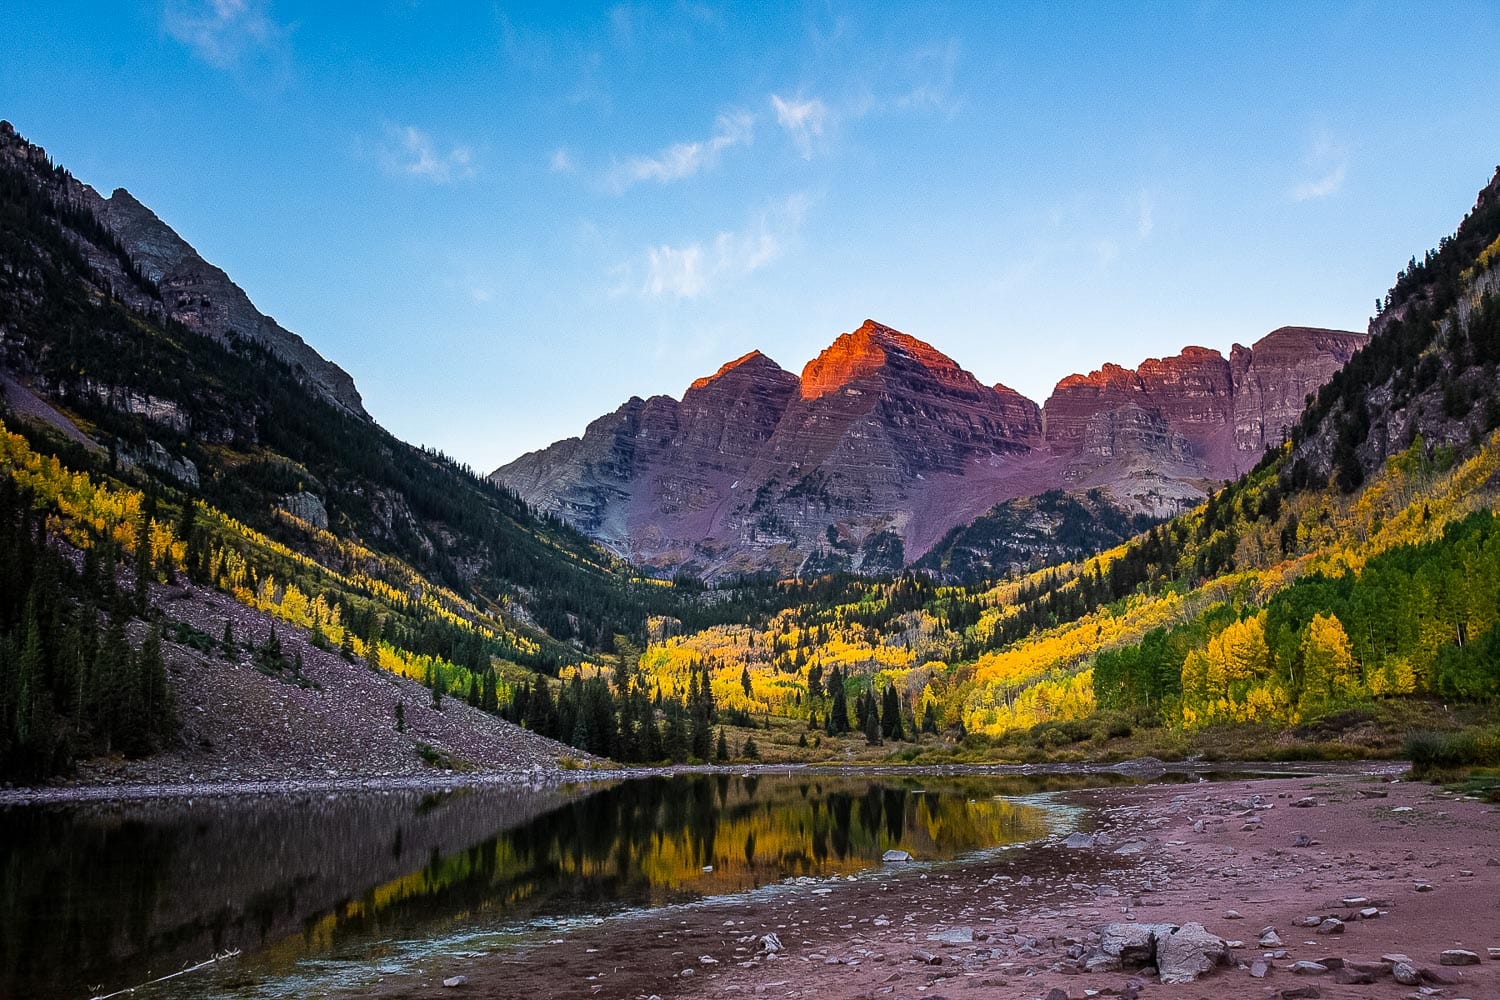 Sunrise at the maroon bells, Colorado in fall